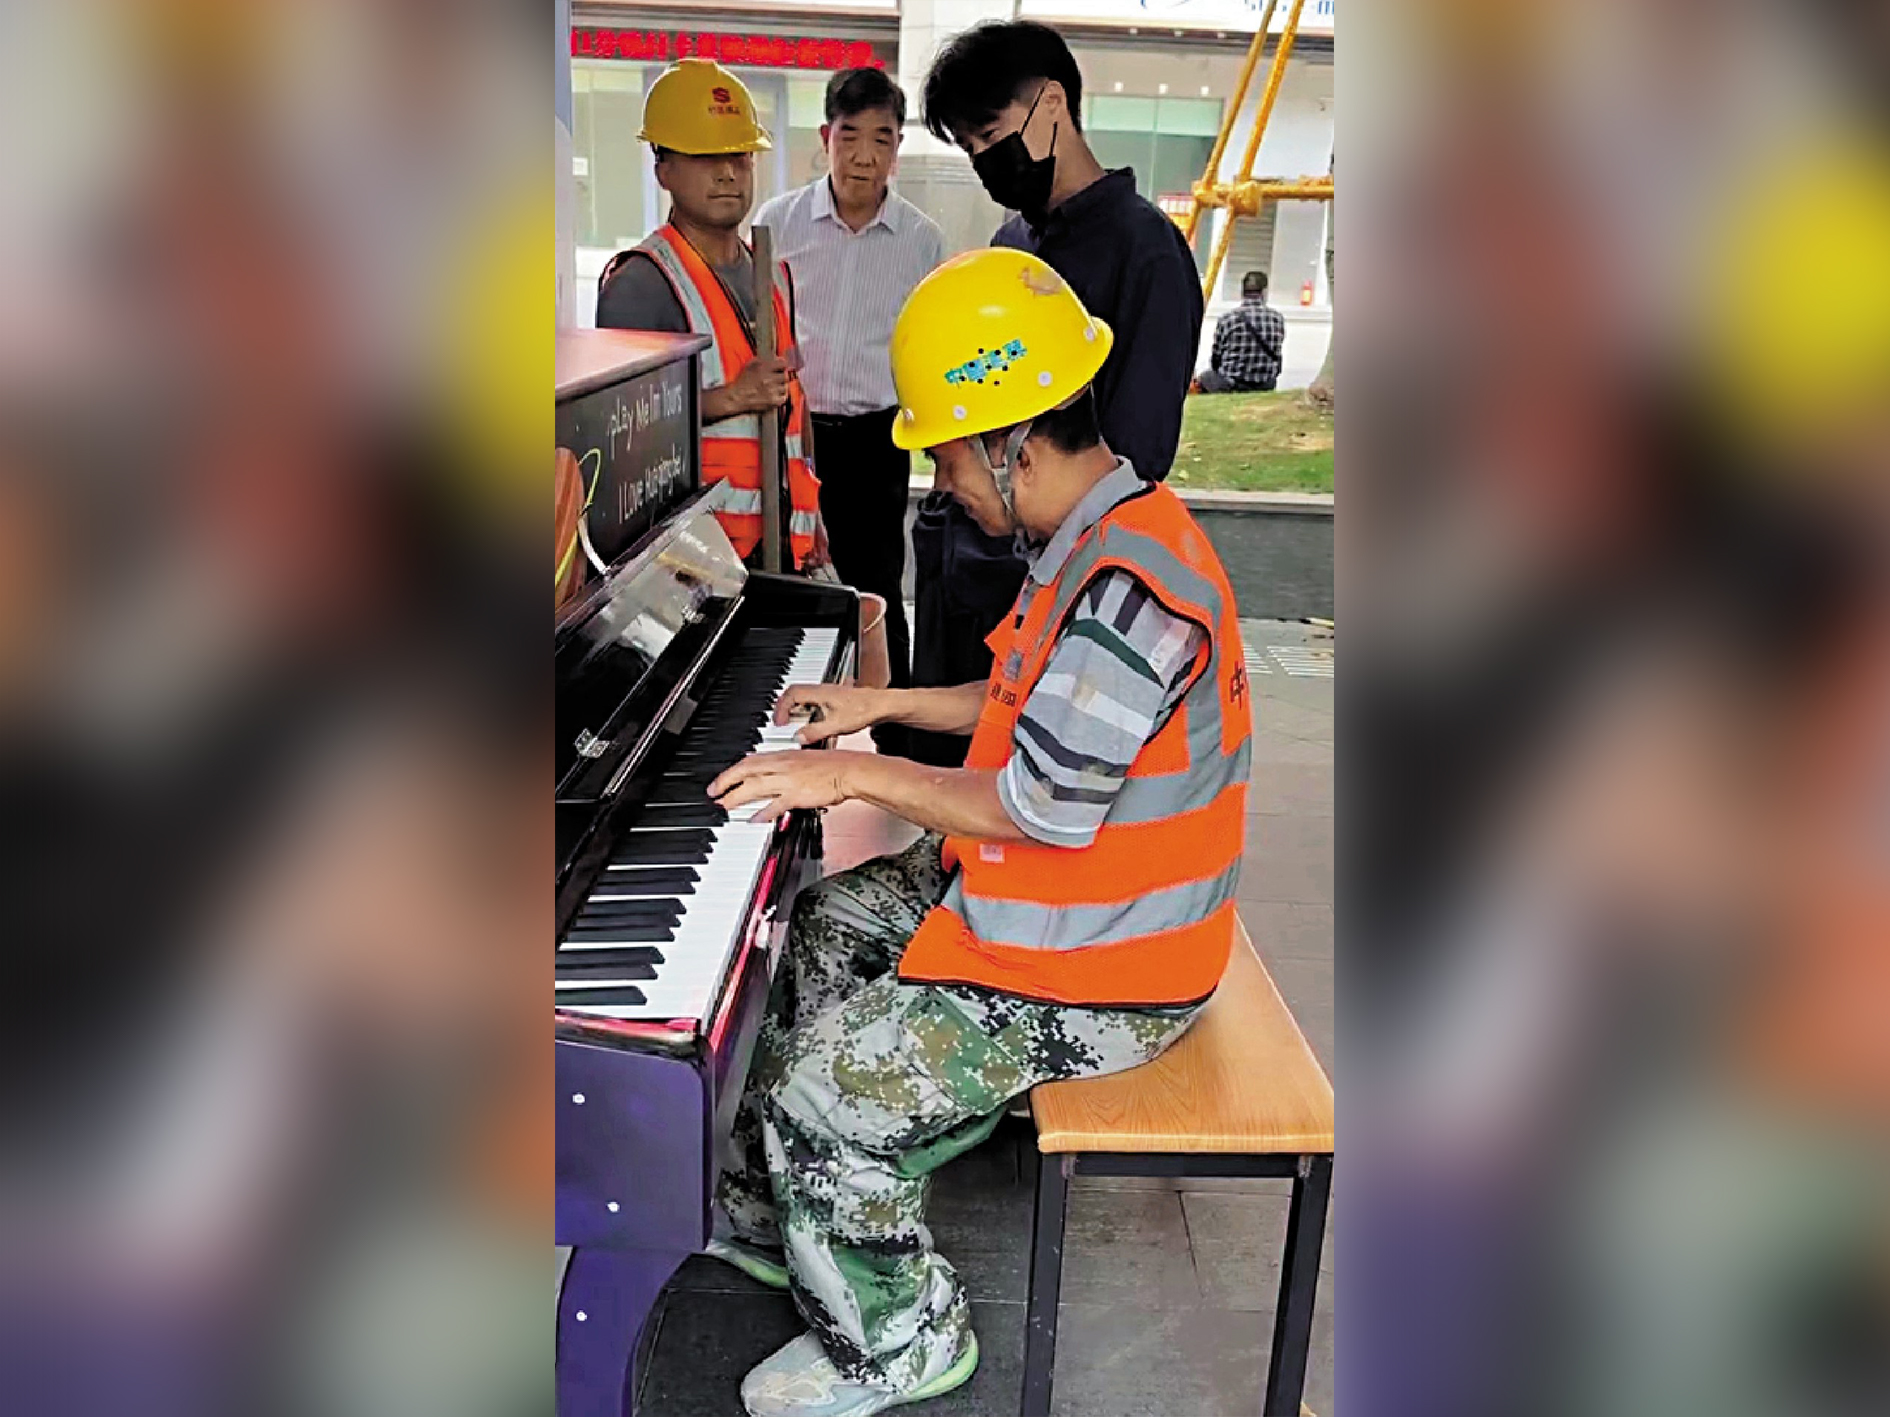 Yi Qunlin, wearing a construction worker's uniform, plays the piano on the street. /Screenshot of a viral video online